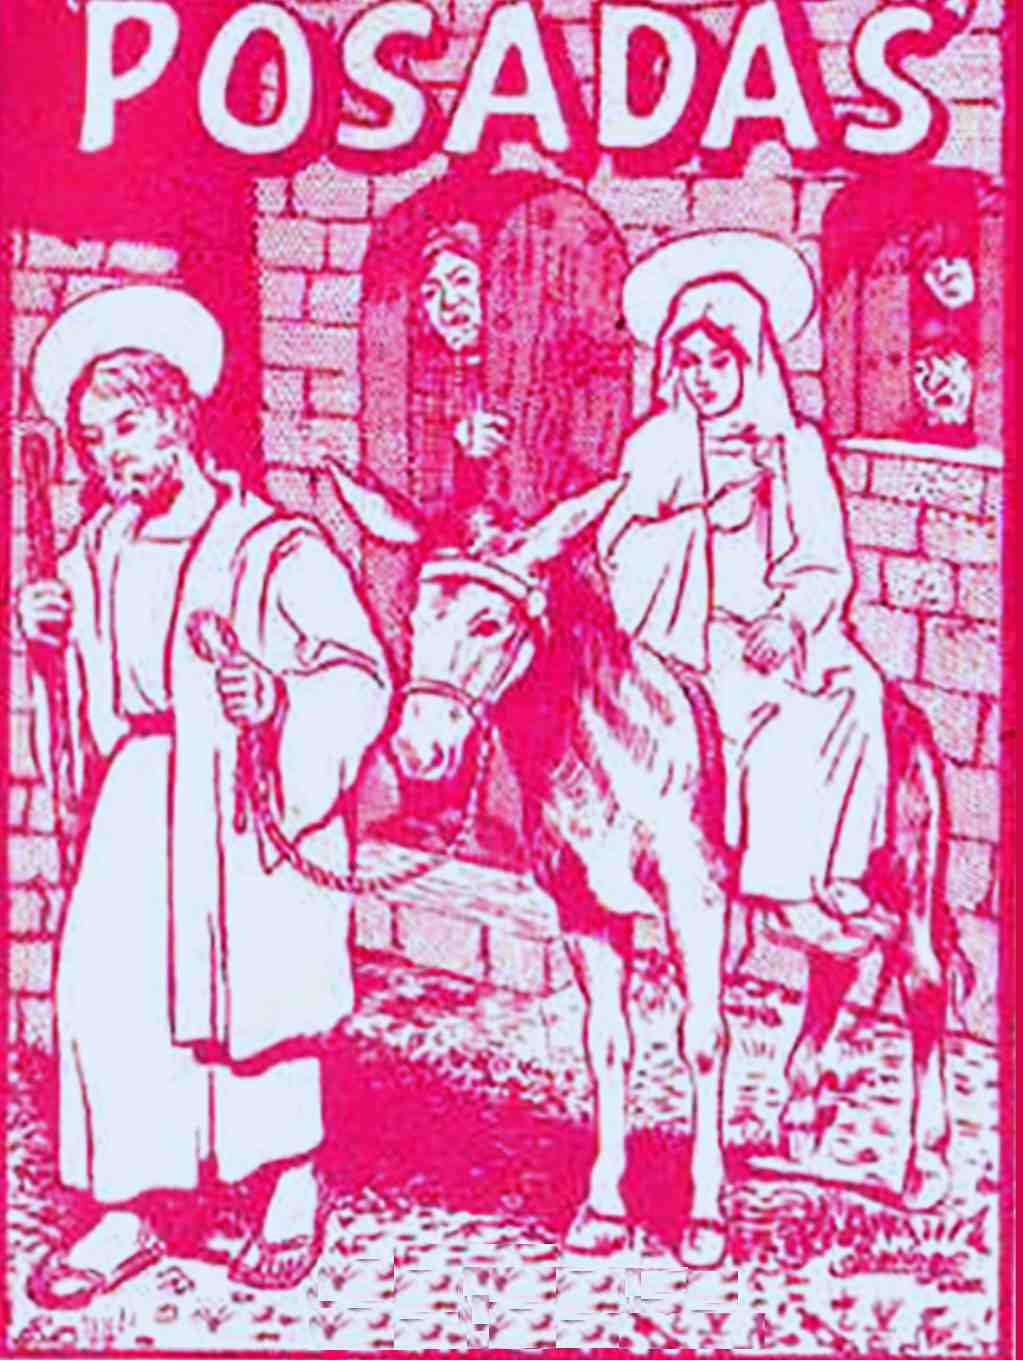 Cover of traditional Posada chanting handbook shows Mary and Joseph in front of an inn. The door to the inn remains closed and  unfriendly faces peer out of the windows at them.